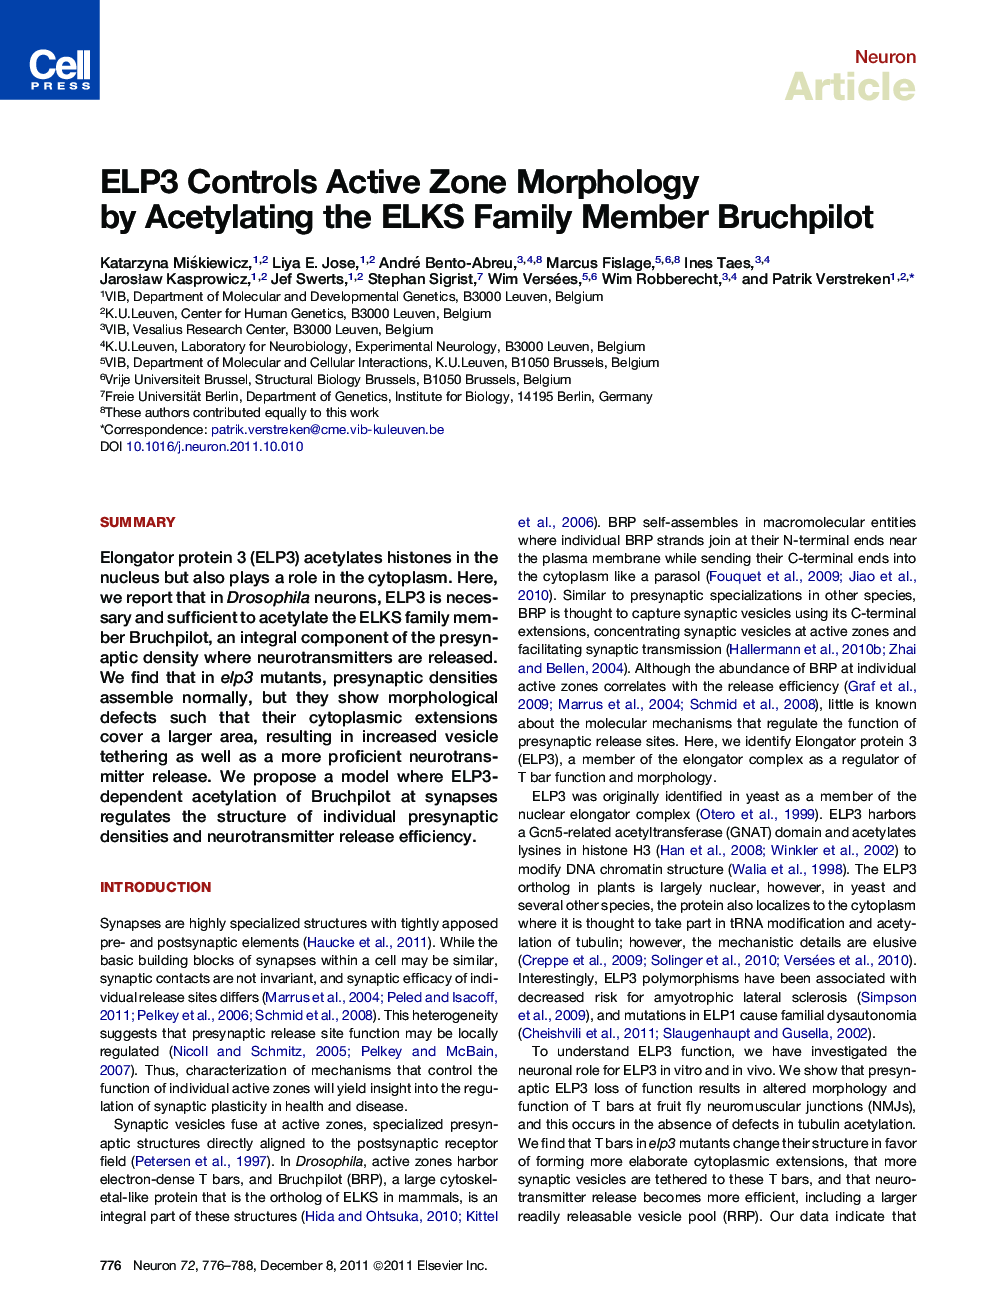 ELP3 Controls Active Zone Morphology by Acetylating the ELKS Family Member Bruchpilot